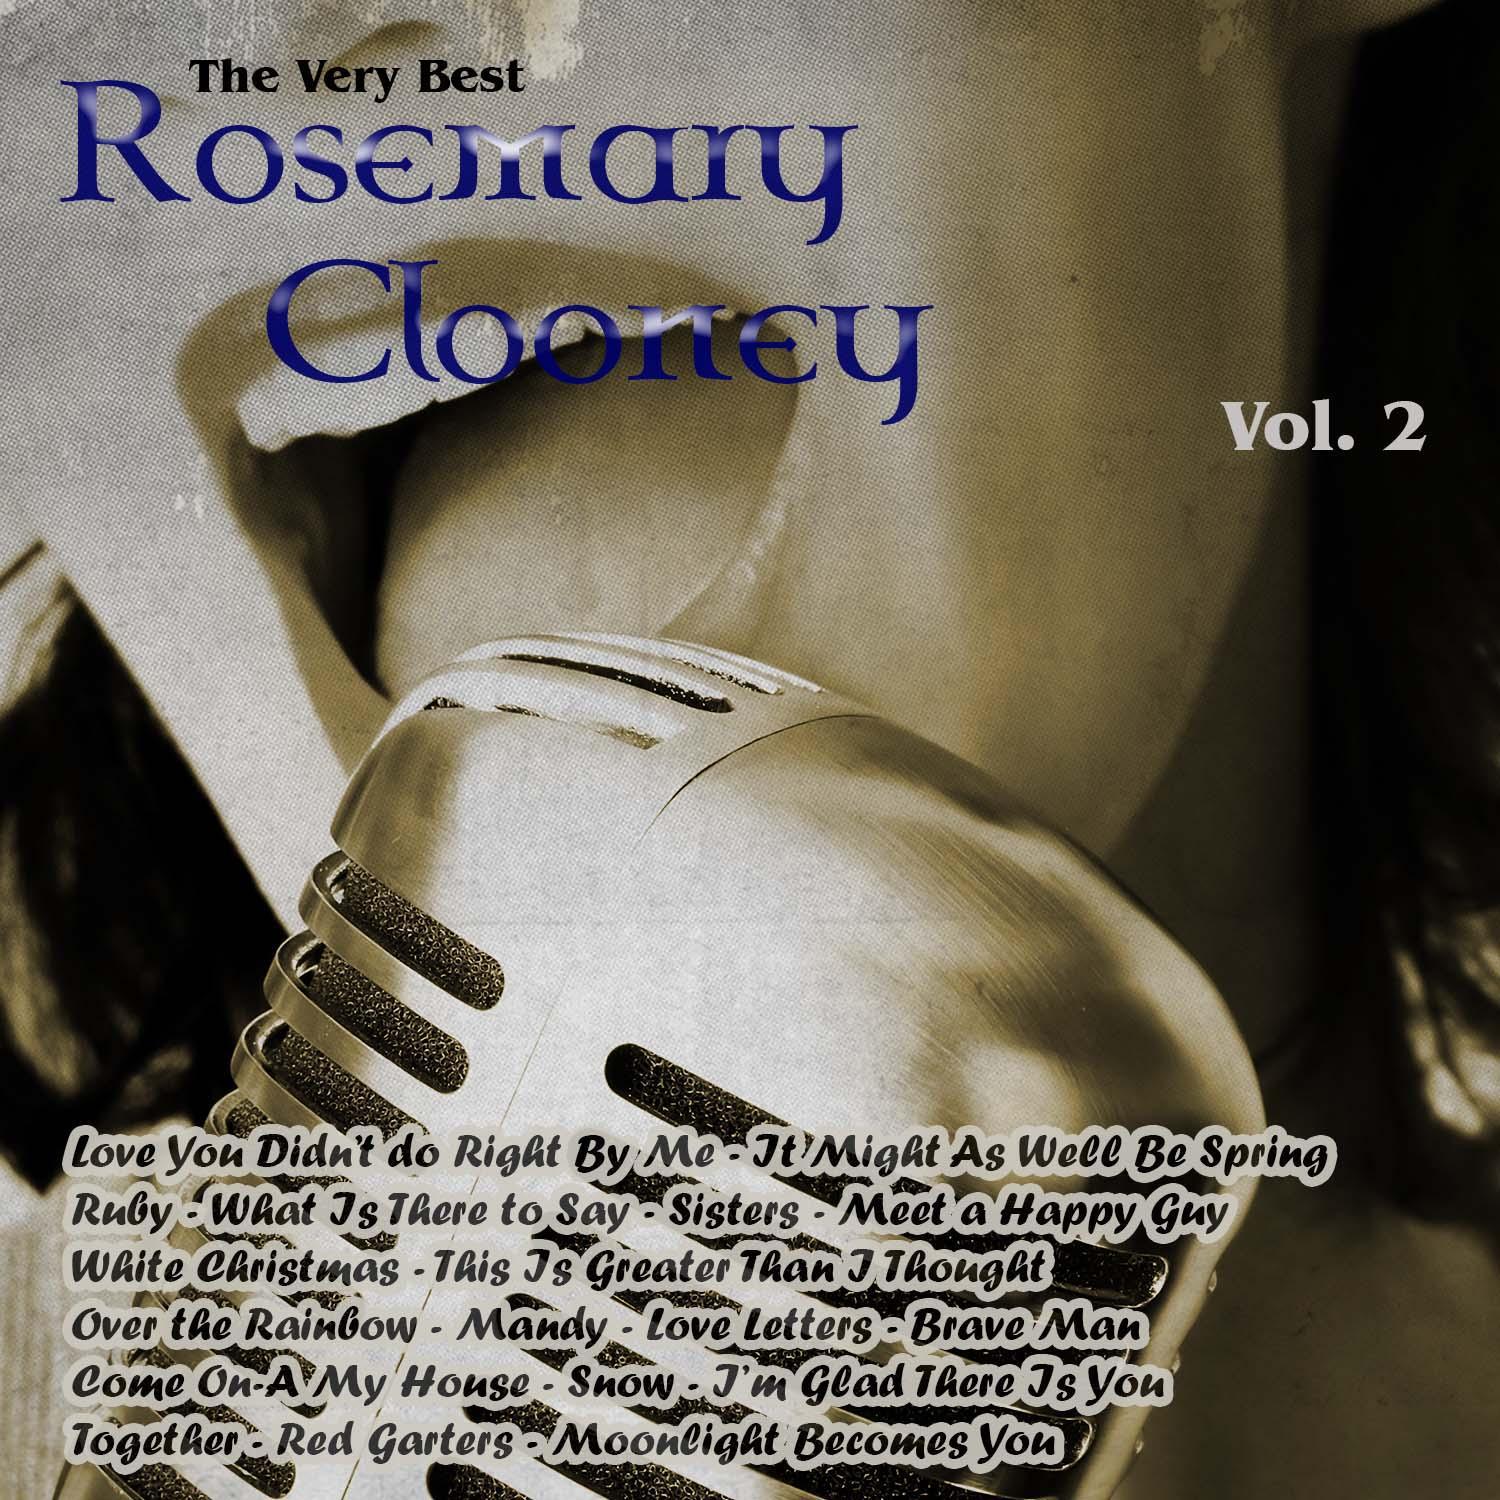 The Very Best: Rosemary Clooney Vol. 2